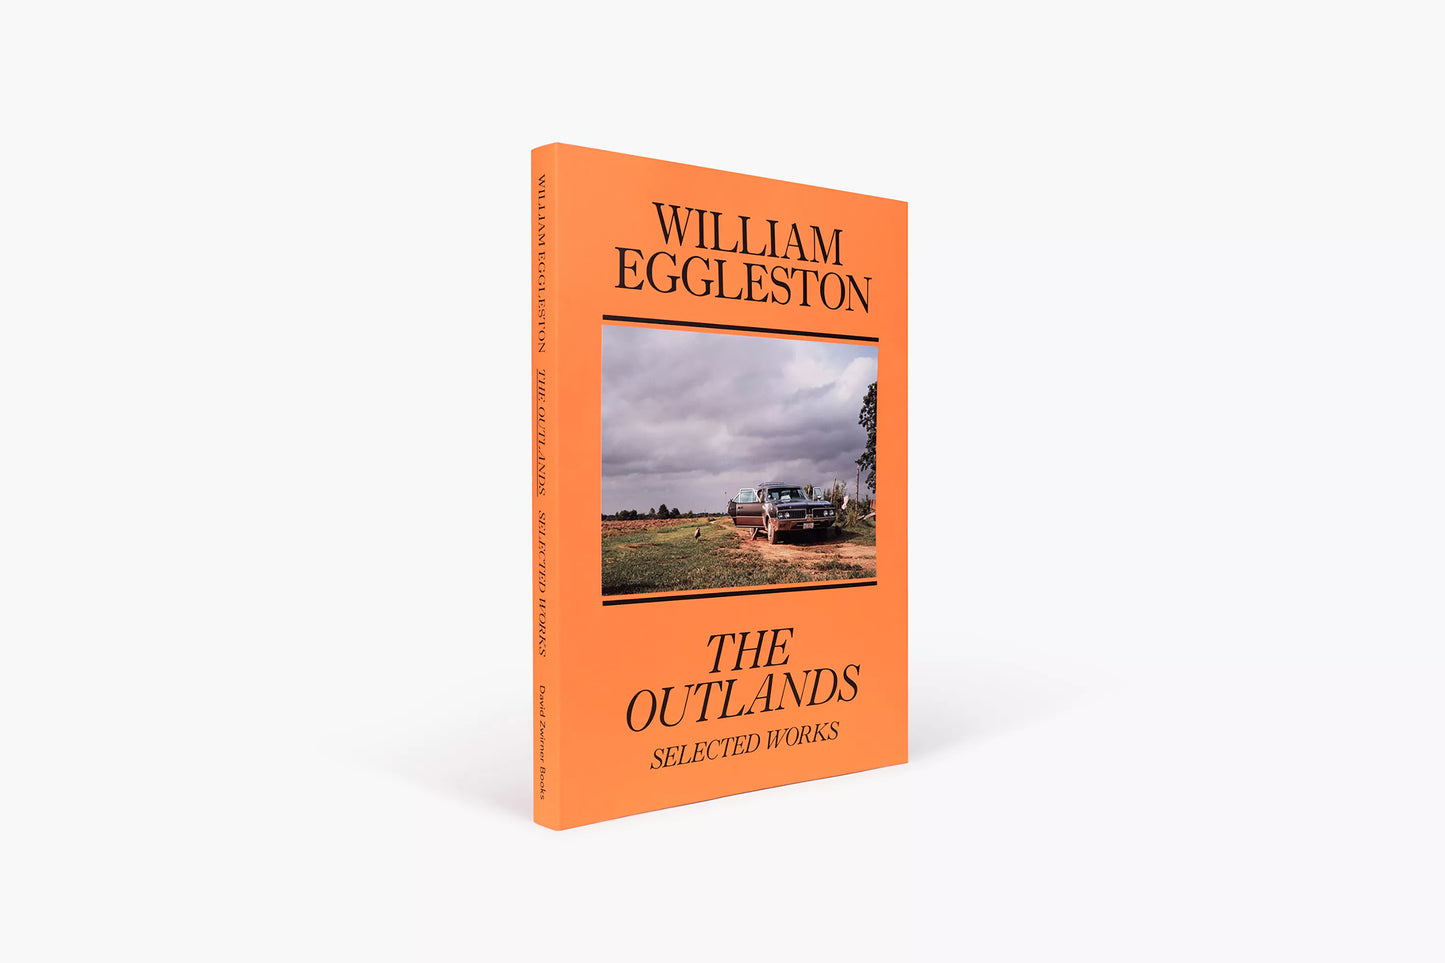 William Eggleston - The Outlands, Selected Works